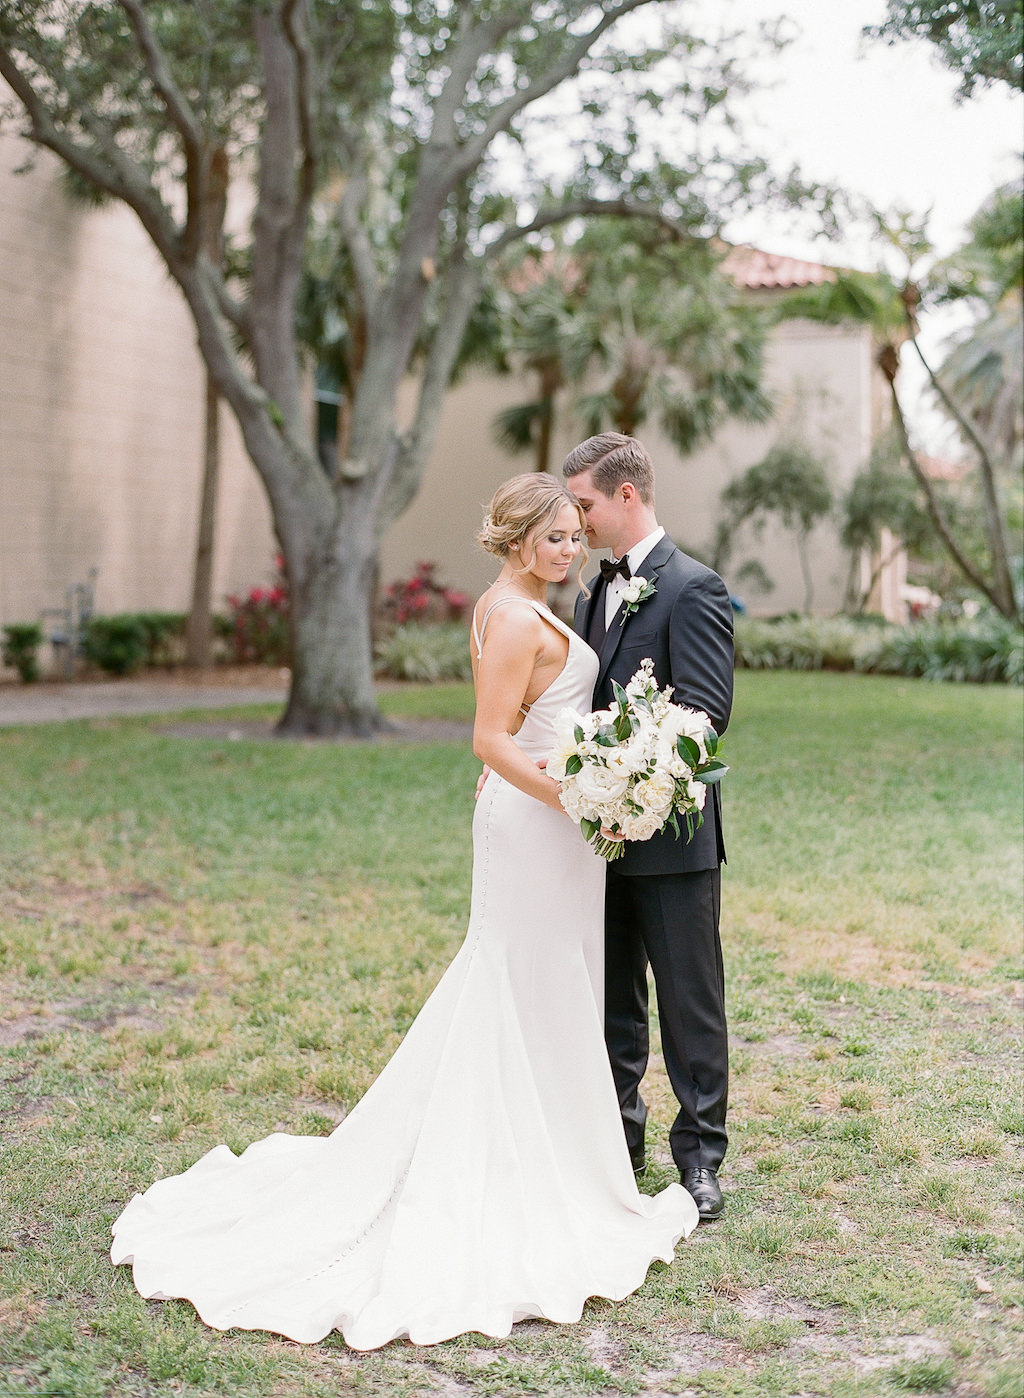 Downtown St. Pete Outdoor Romantic Bride and Groom Intimate Wedding Portrait